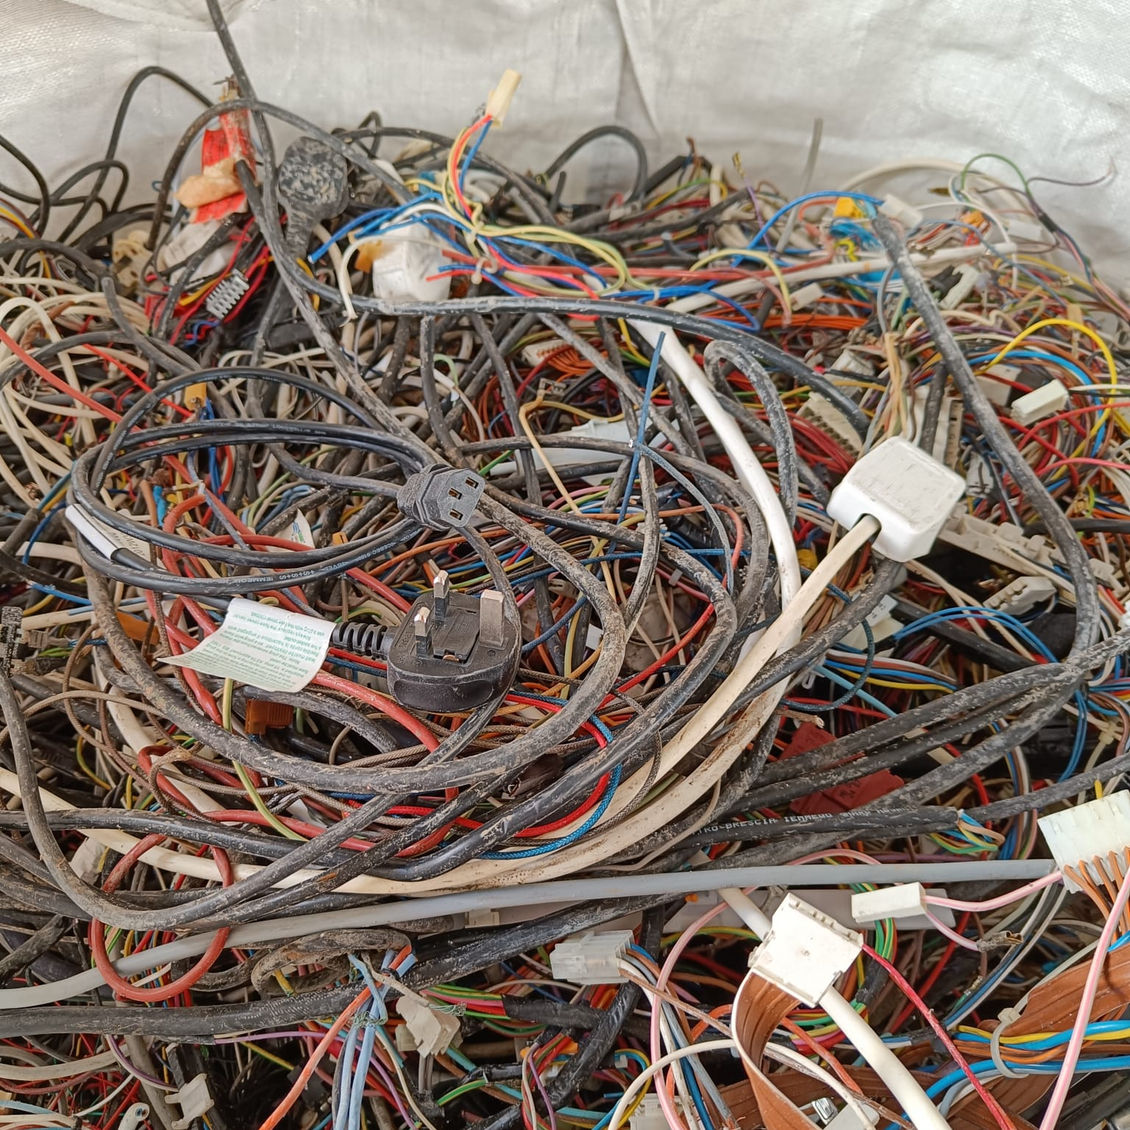 Wires and Cables Recycling